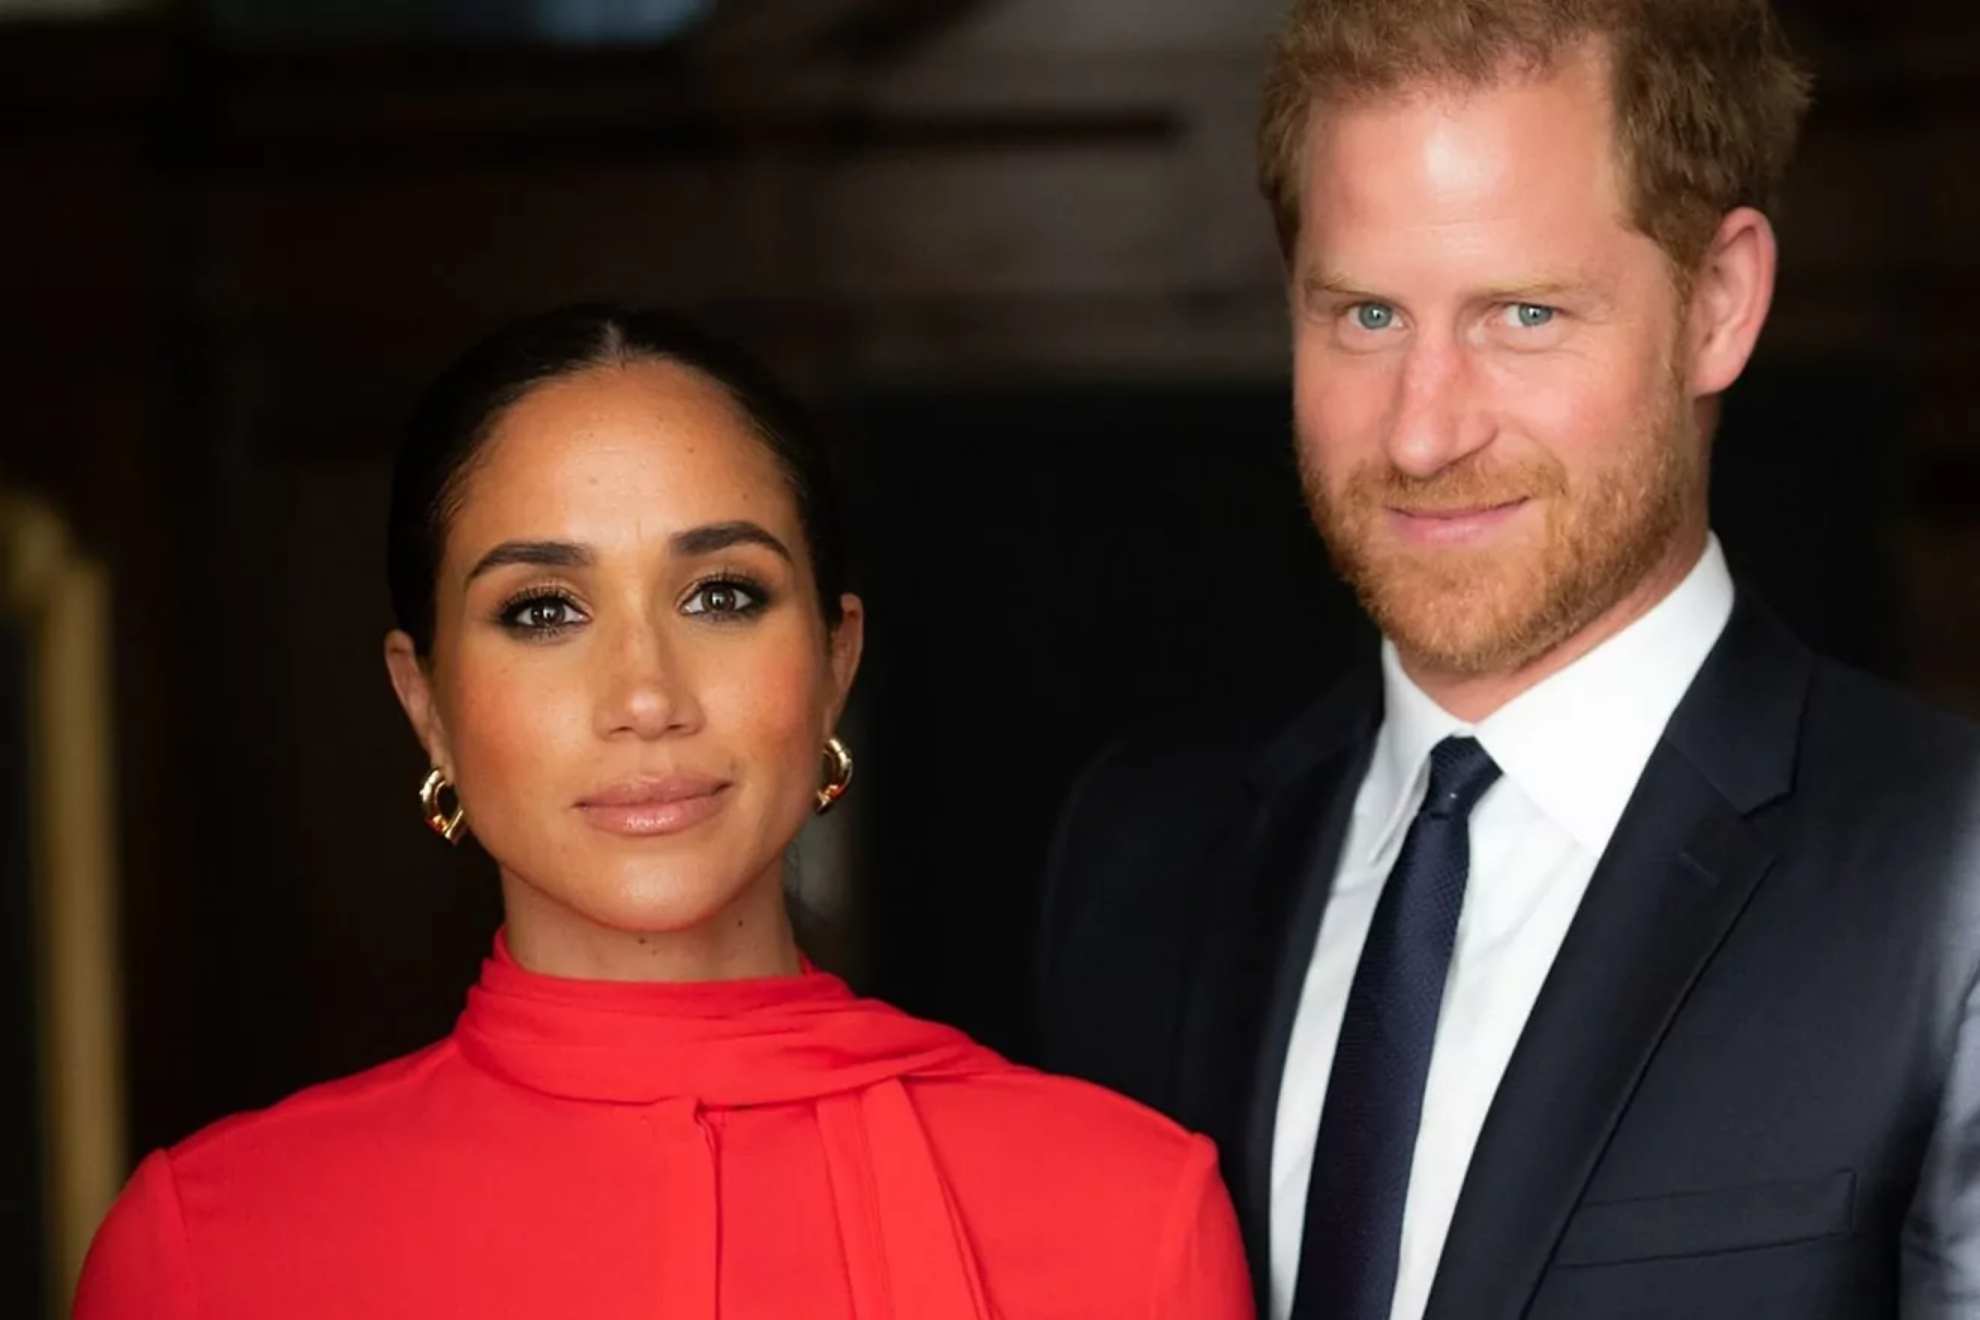 Prince William and Princess Kate offer gesture to end Prince Harry feud... but Meghan delivers snub